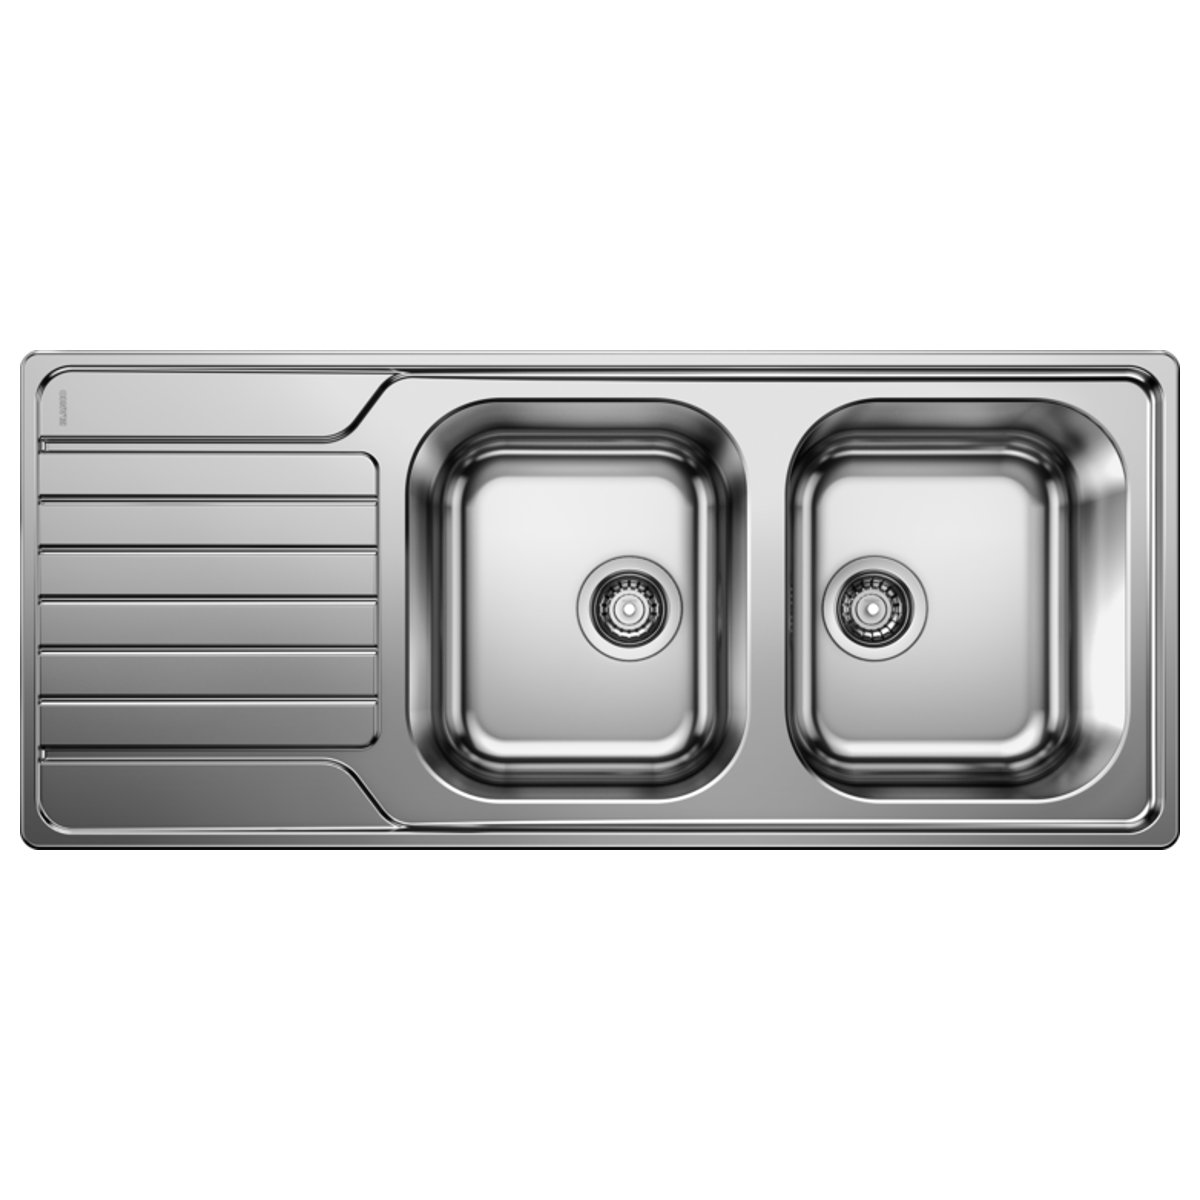 Dinas 8 S Blanco Modern 2 Bowl Stainless Steel Kitchen Sink with Reversible Drainer 116×50